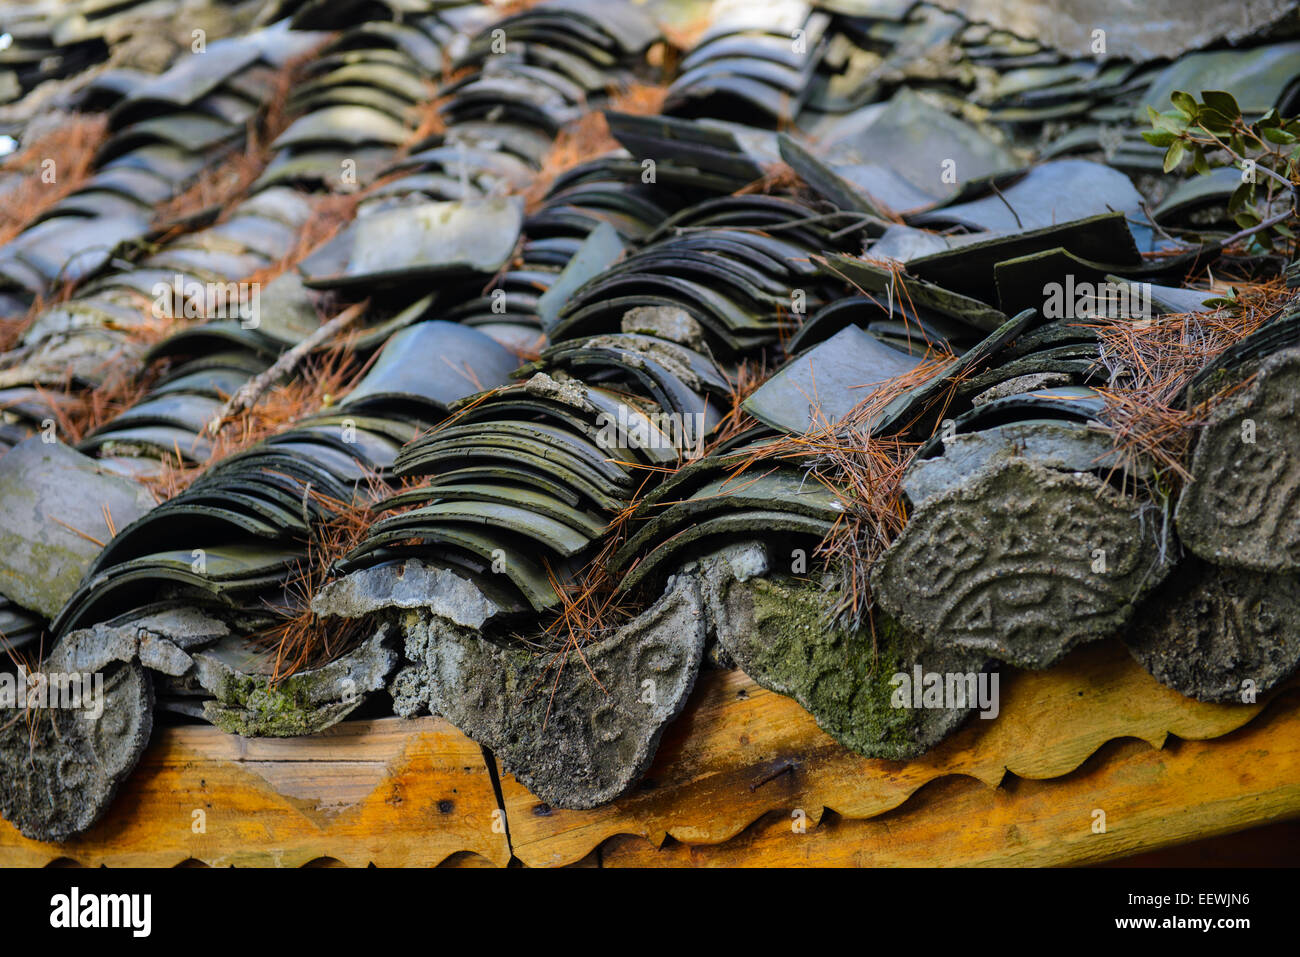 Chinese roof tiles Stock Photo